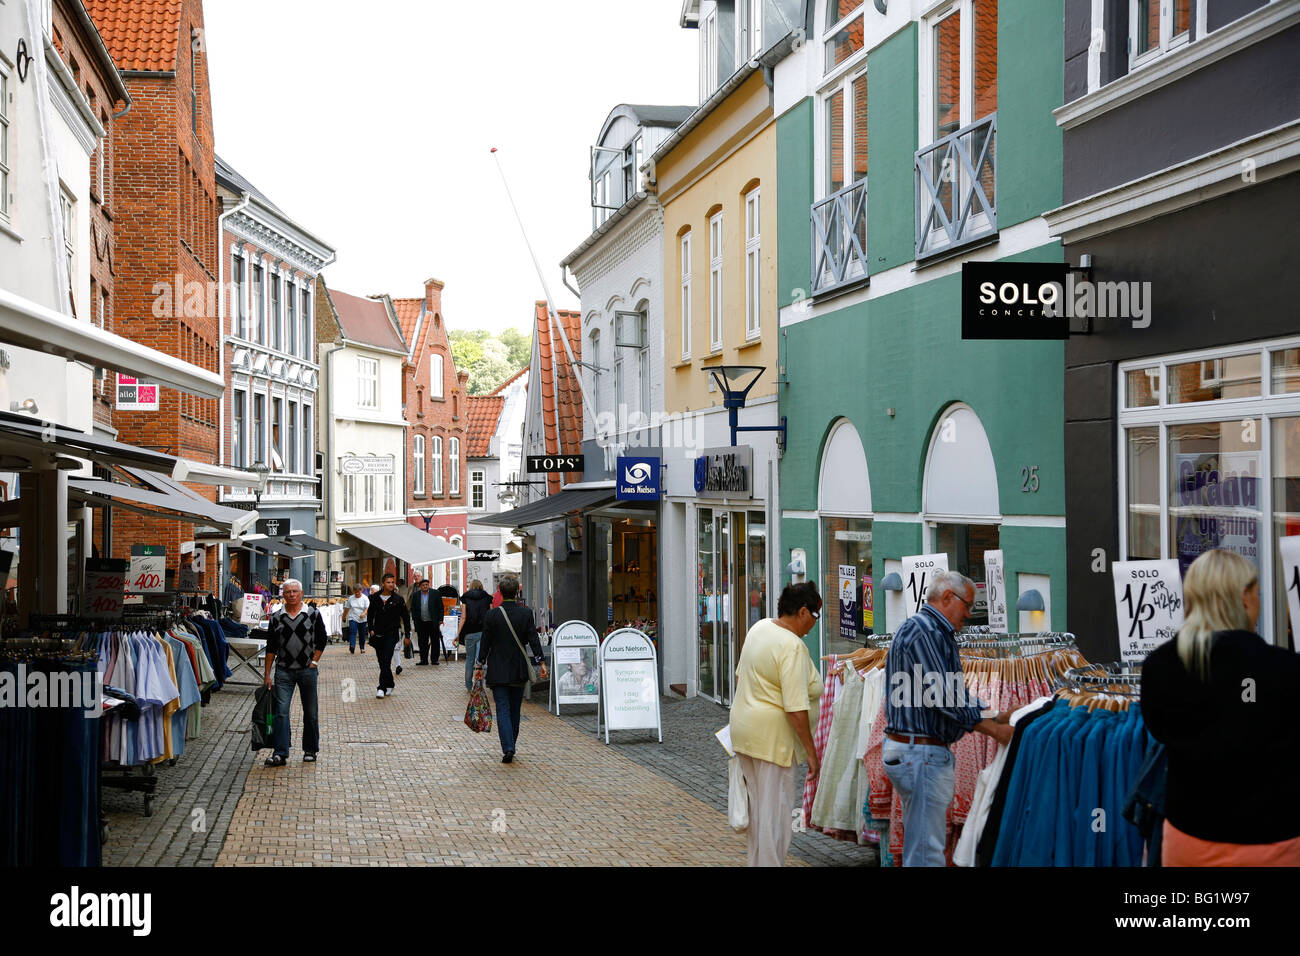 Aabenraa denmark hi-res stock images - Alamy